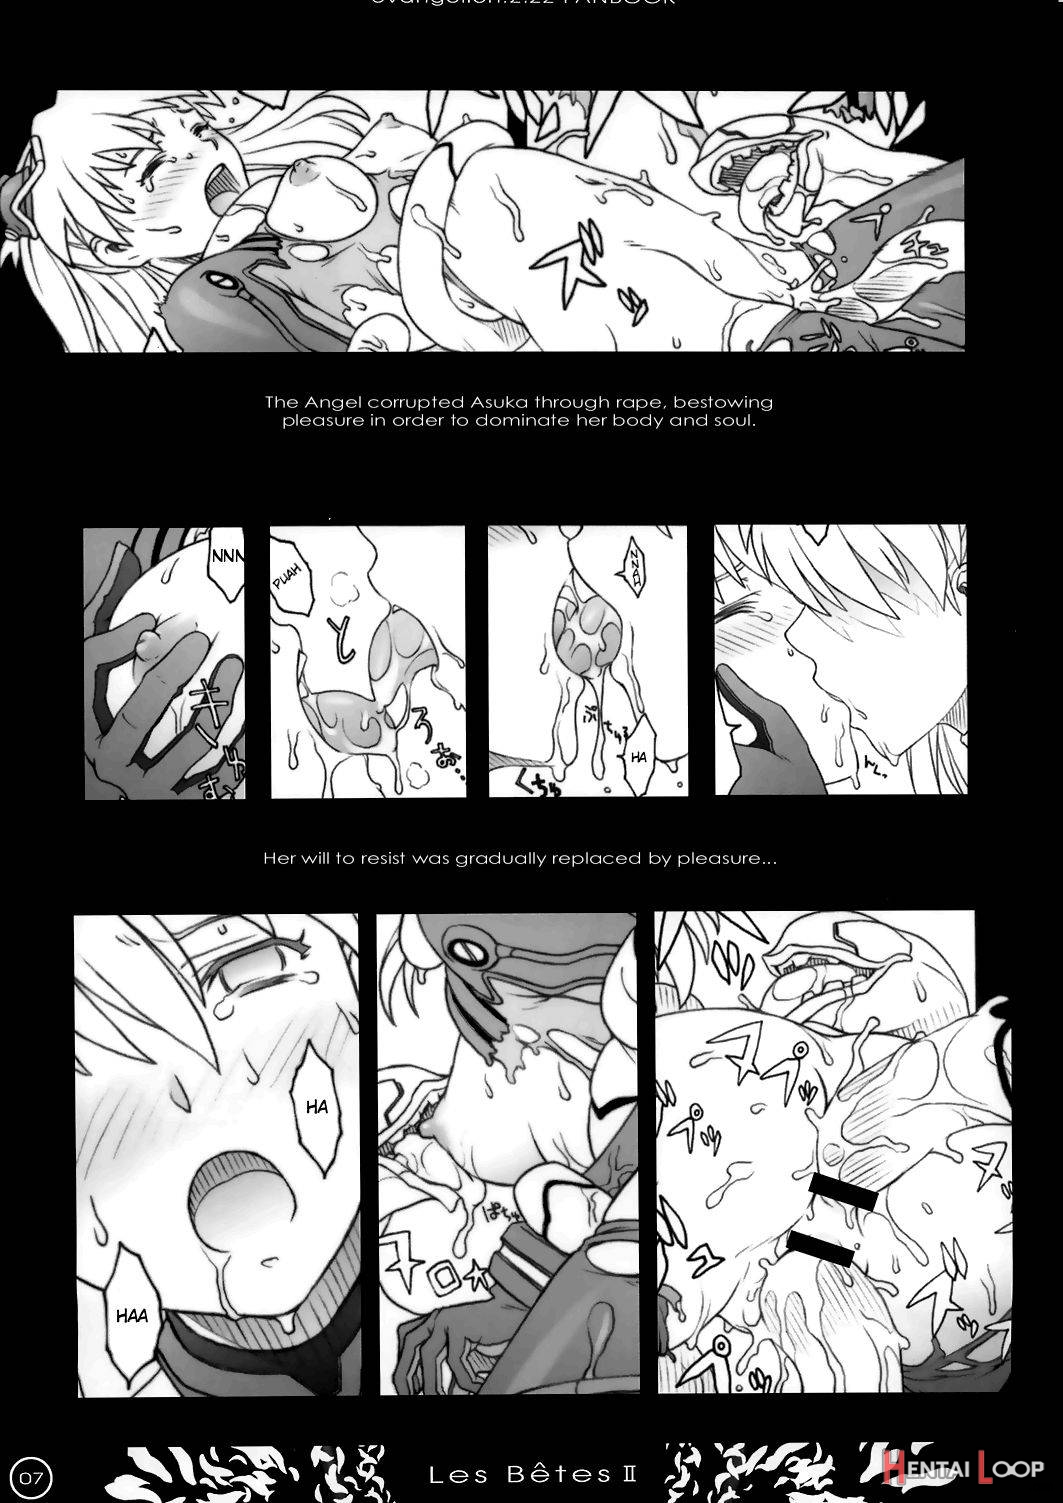 Les Betes II page 5